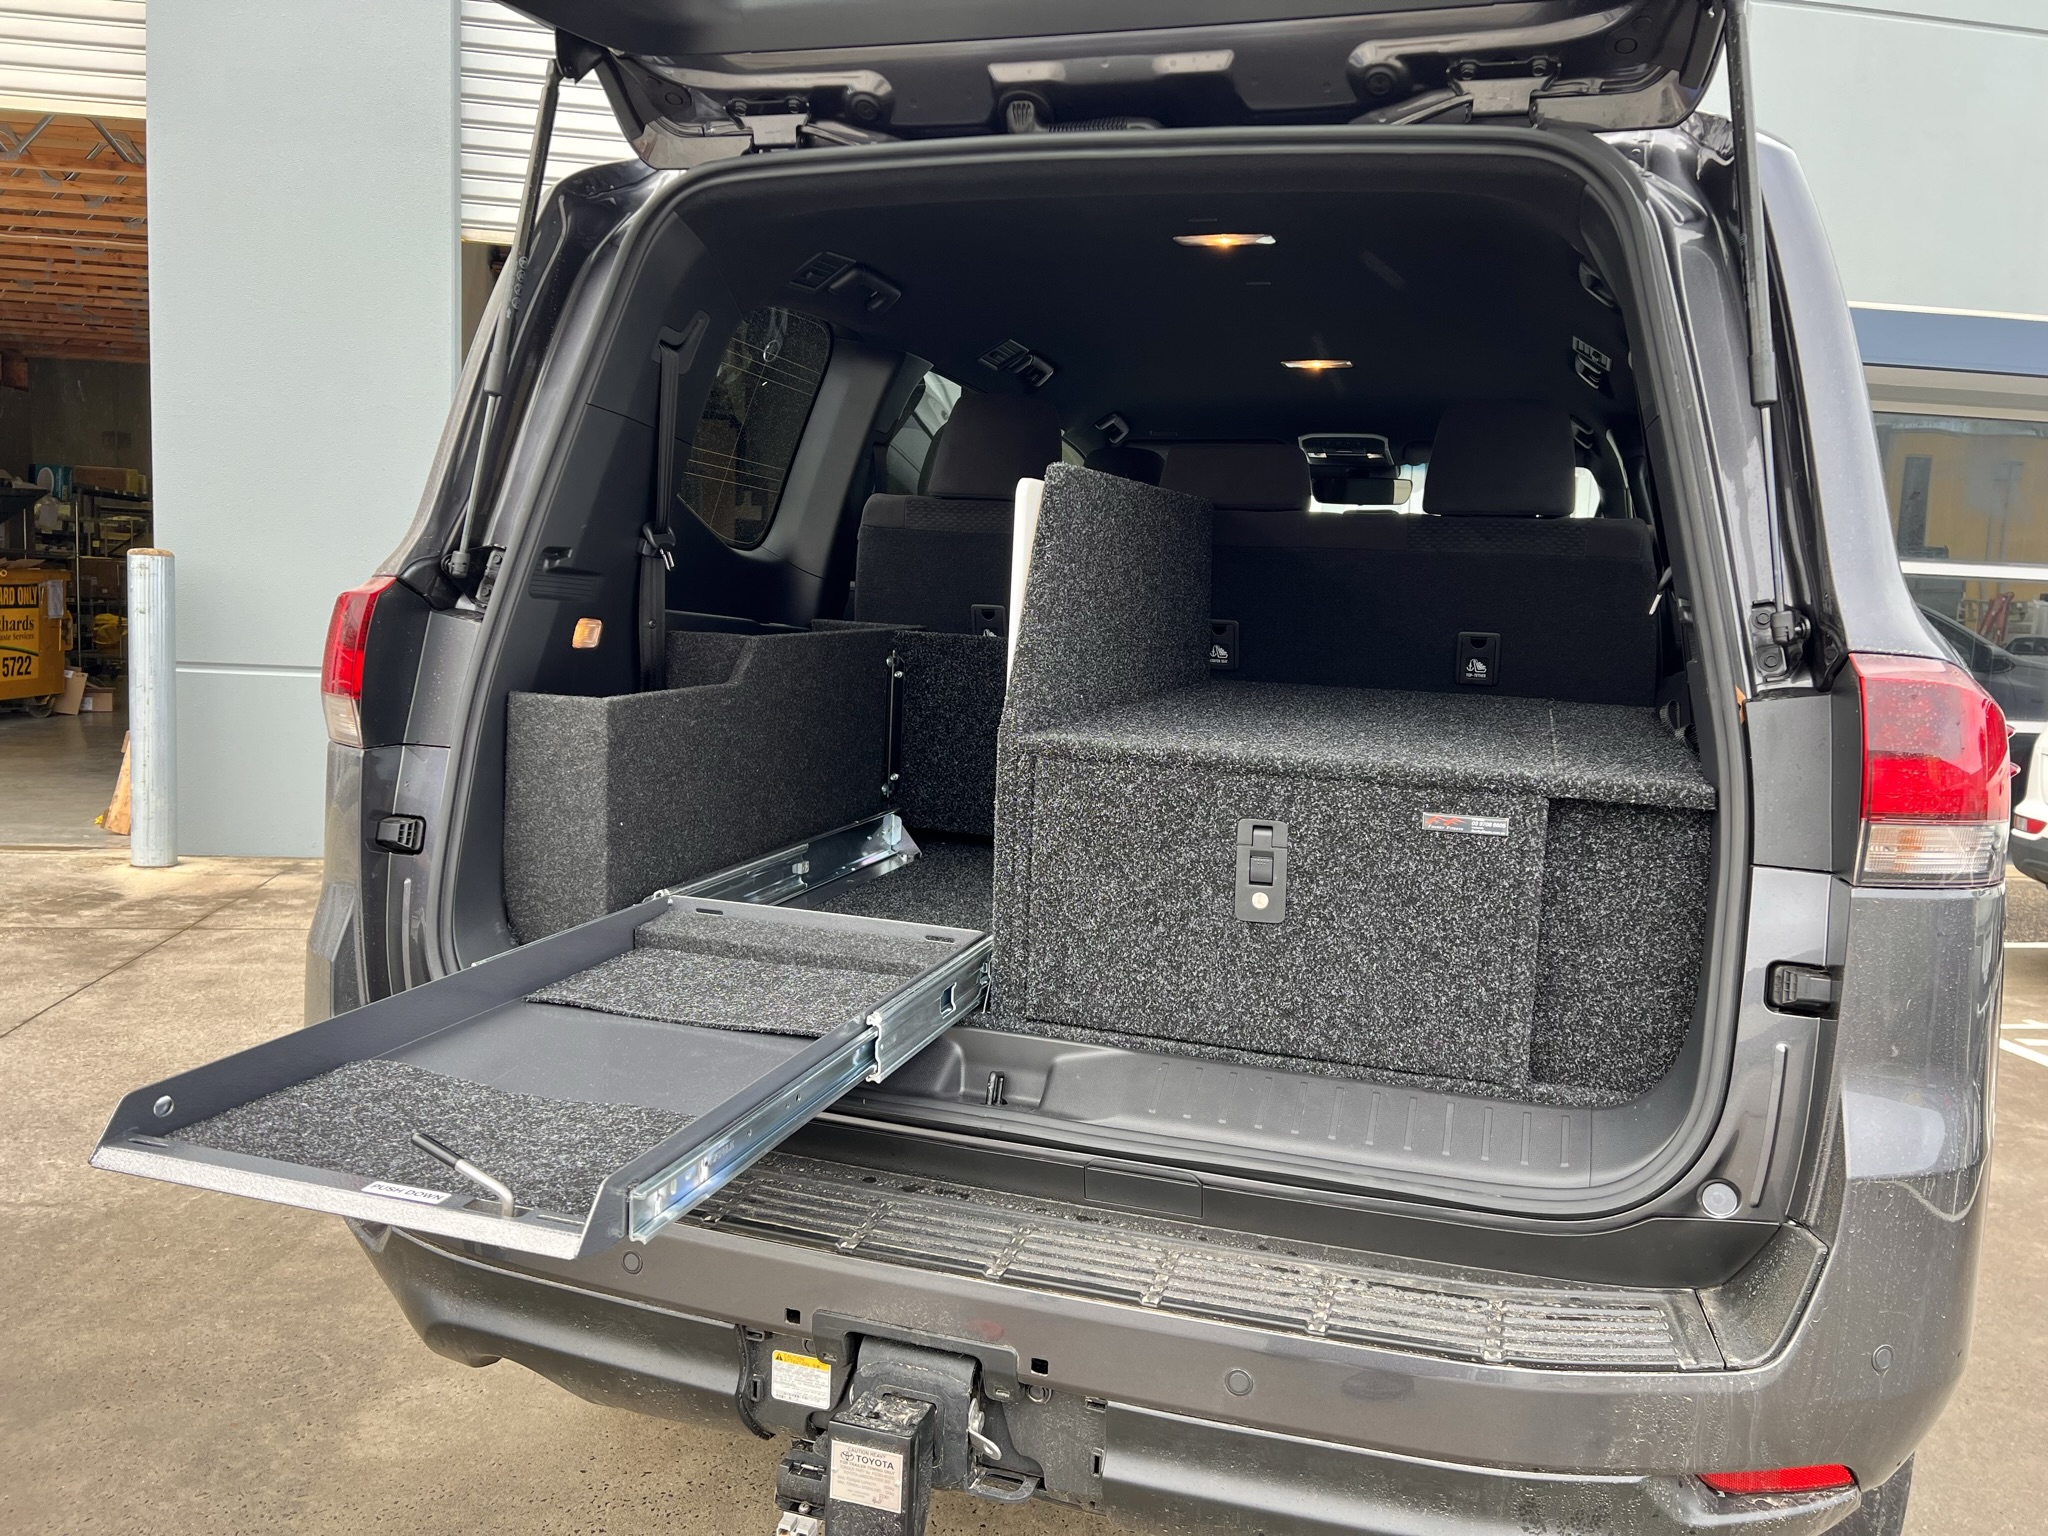 Lc 300 series – overseat storage system